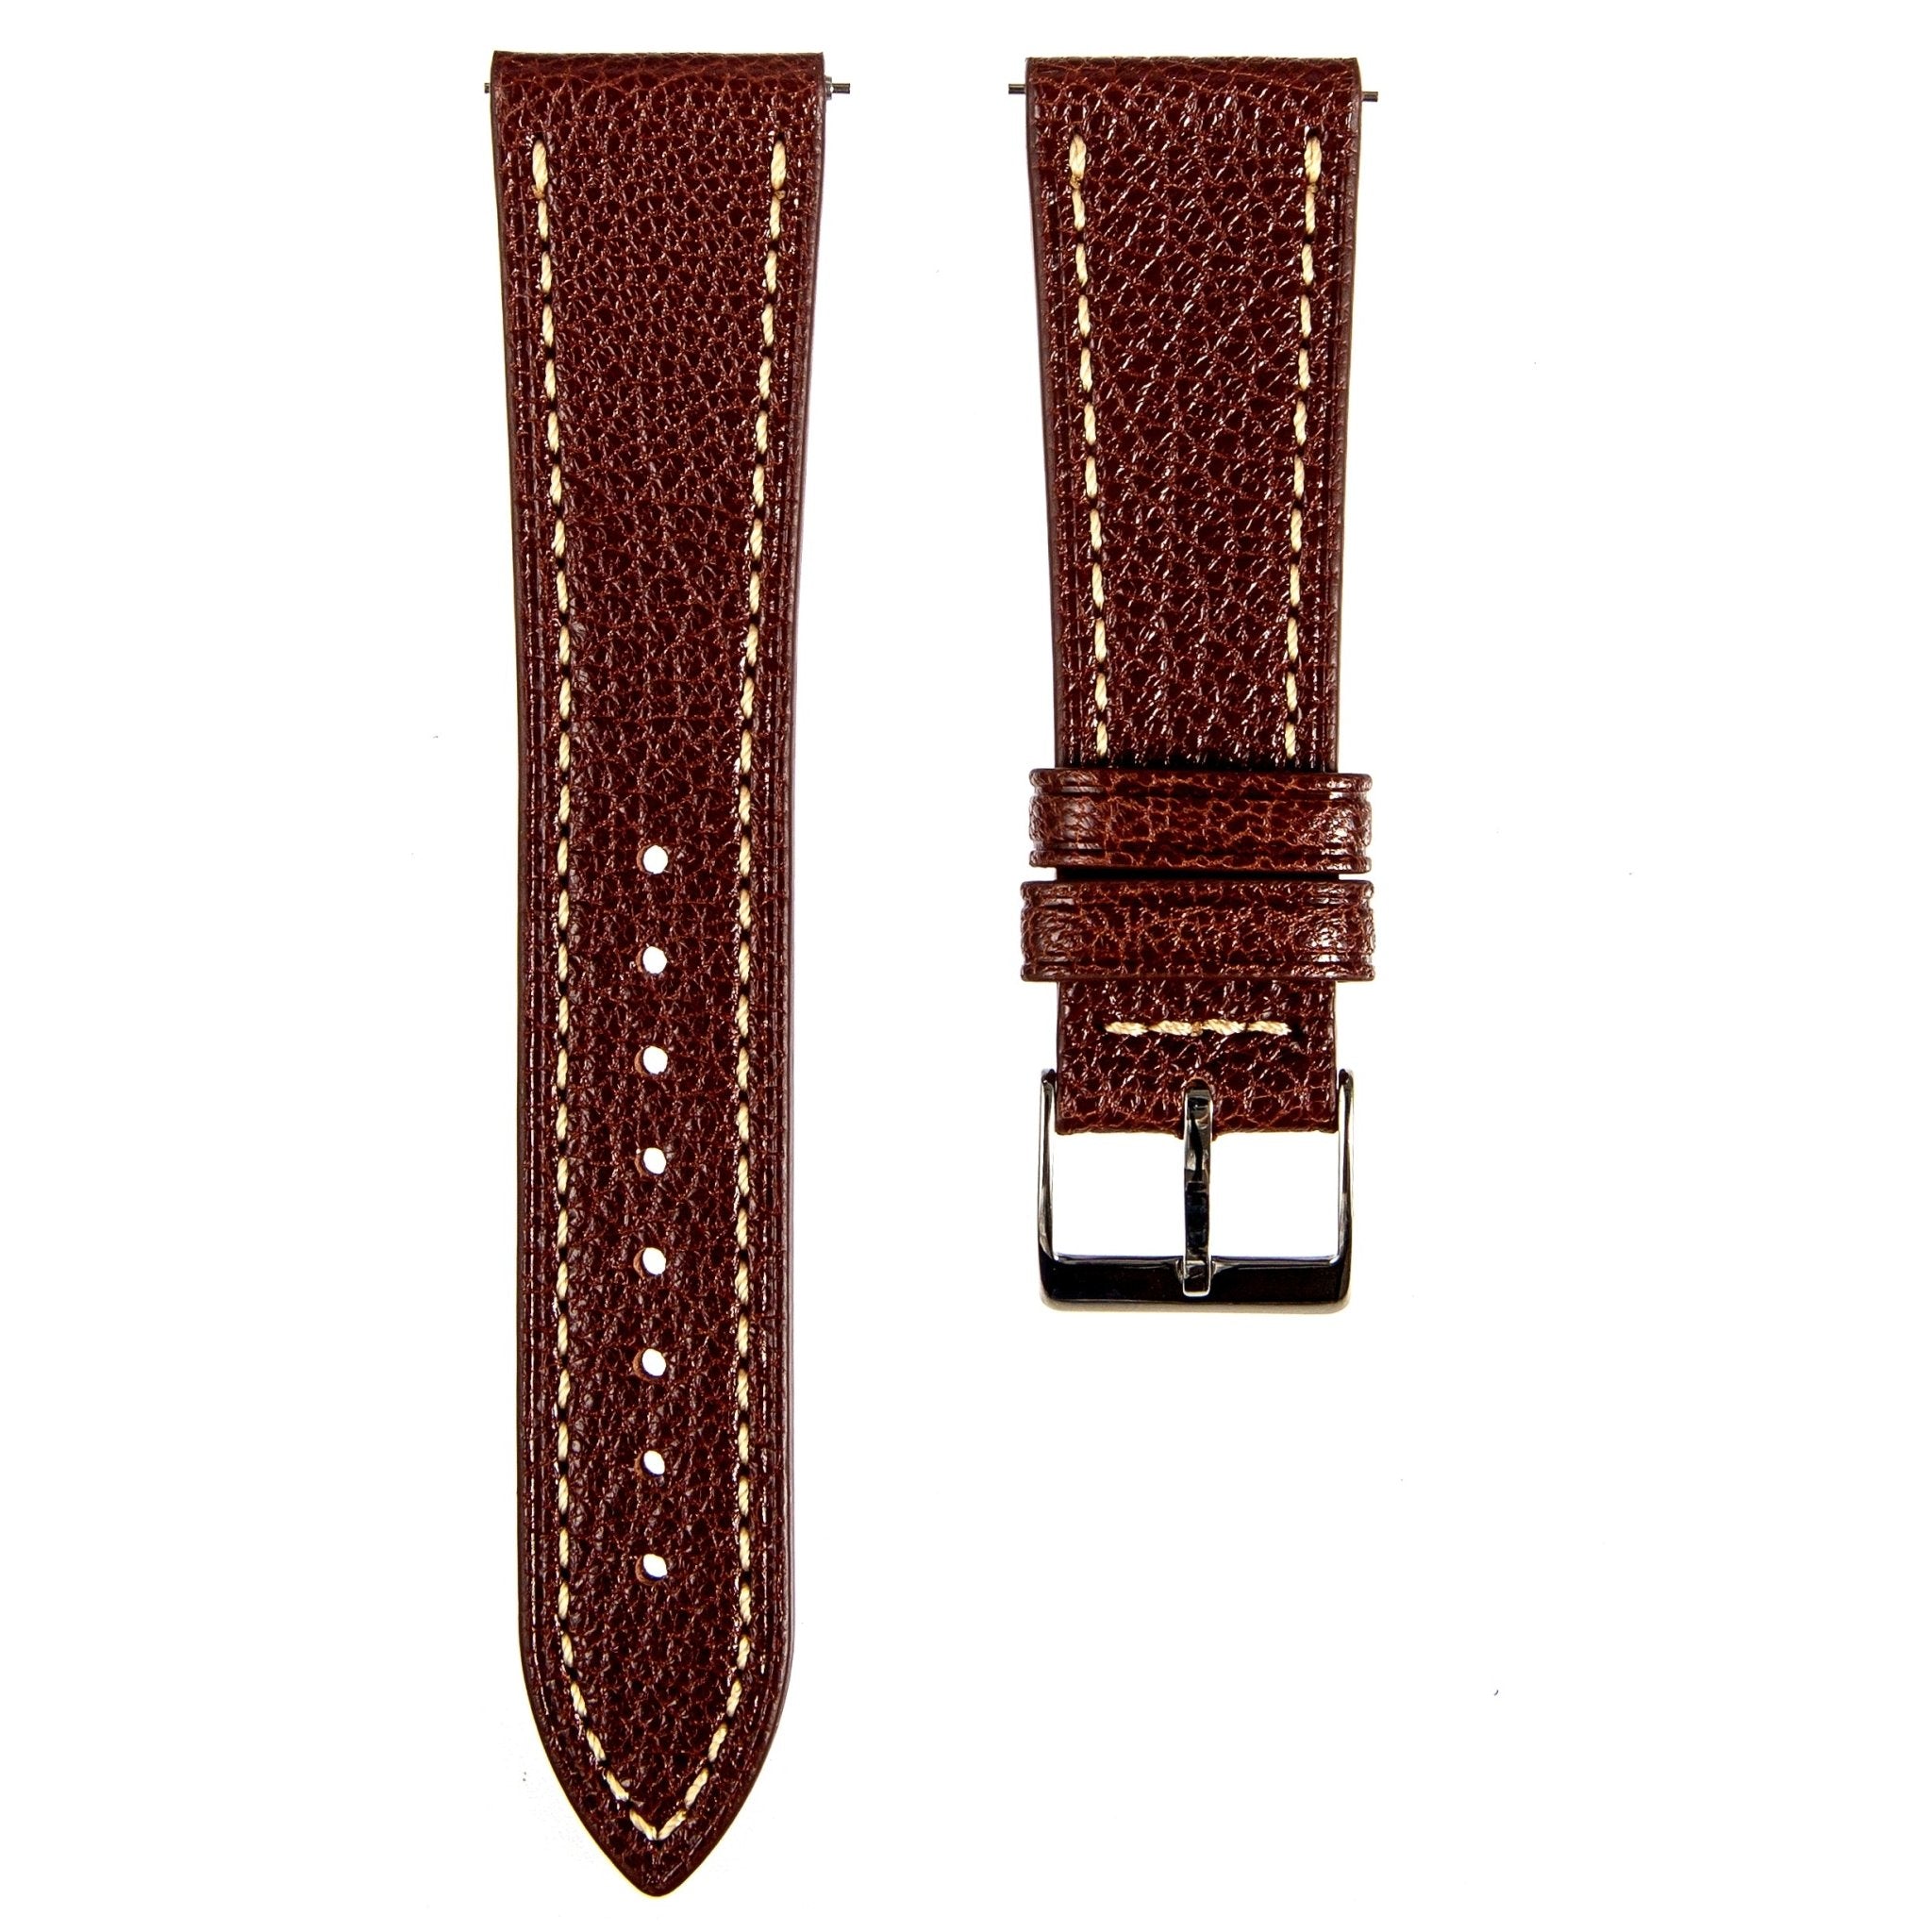 Sully Chevre Leather Strap - Quick-Release - Brown (2428) -StrapSeeker